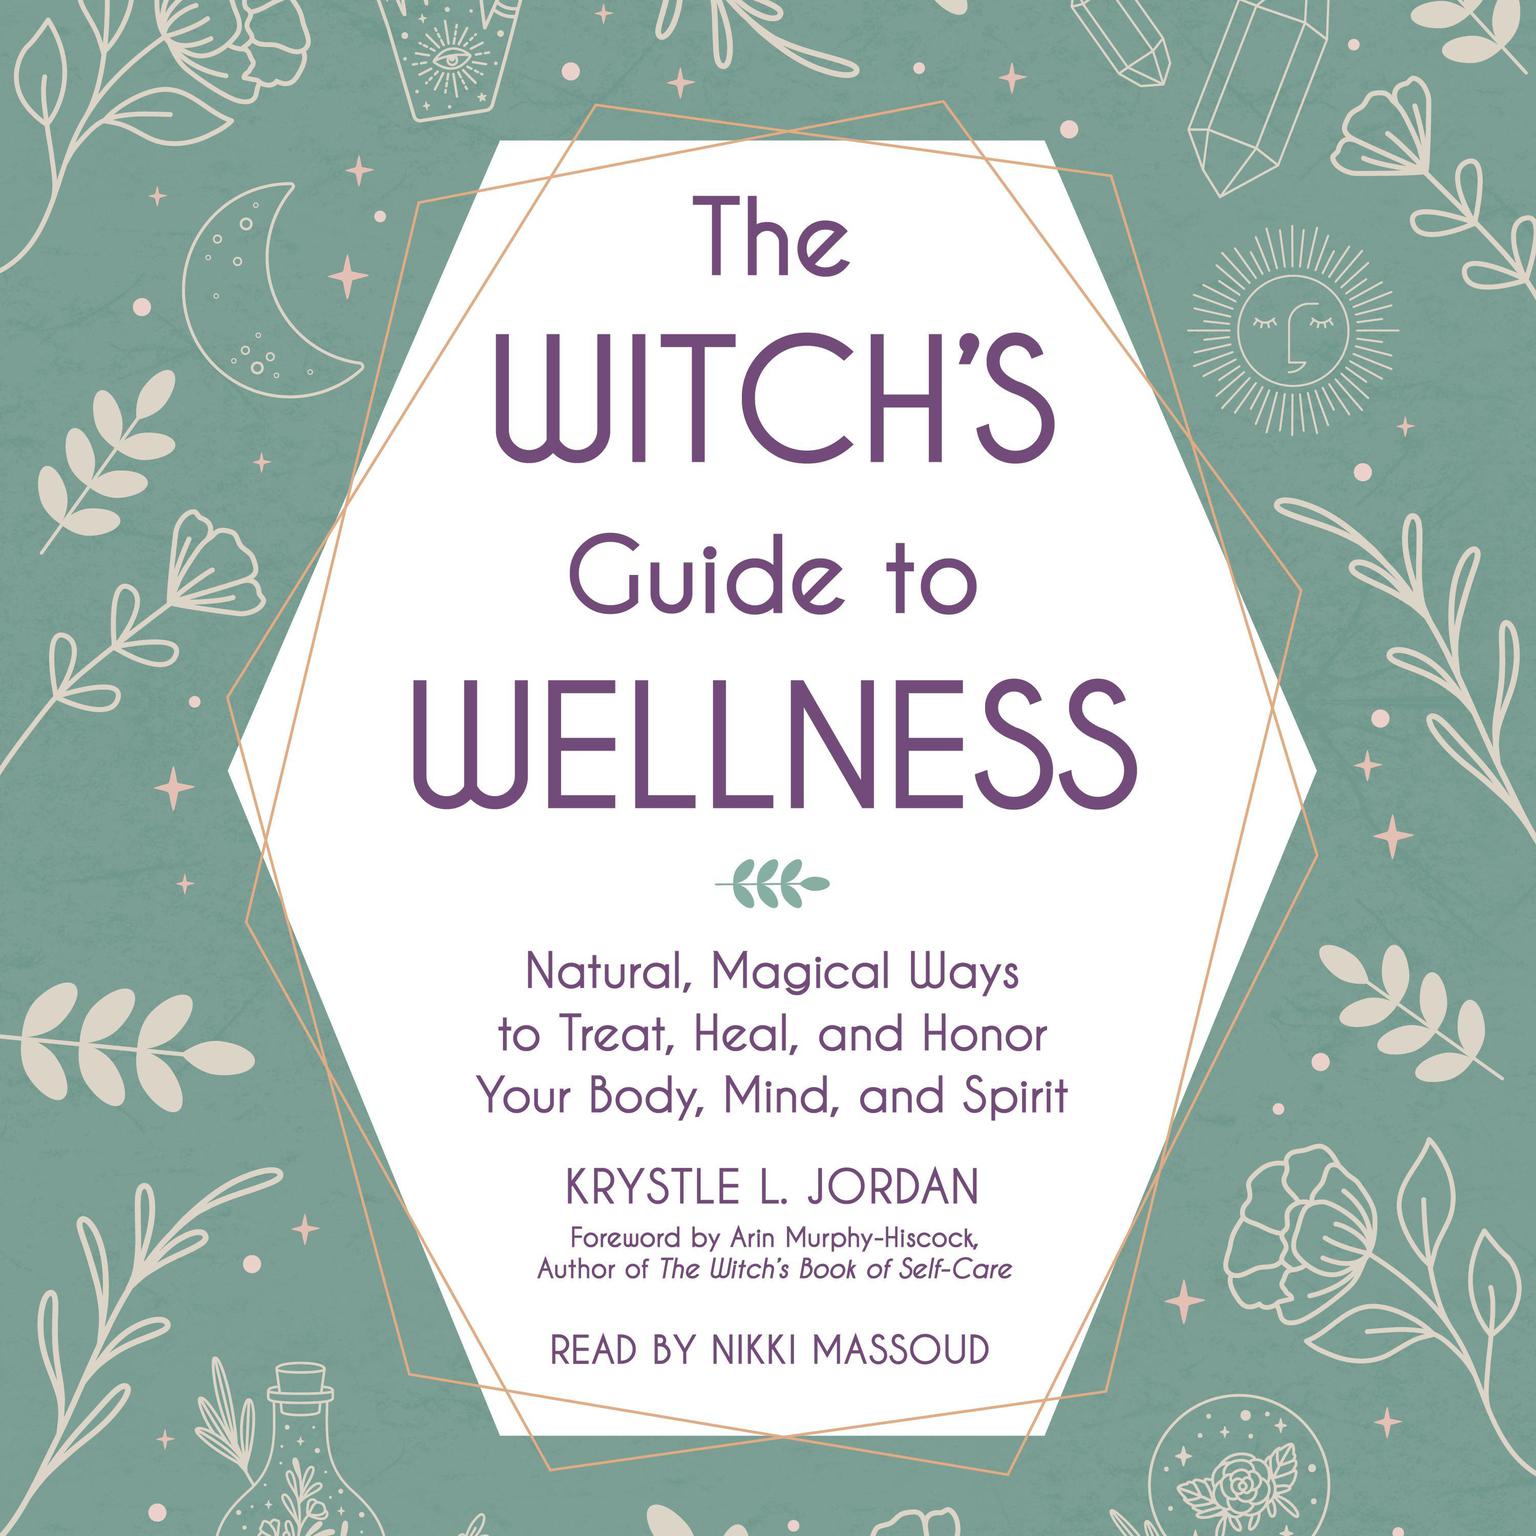 The Witch’s Guide to Wellness: Natural, Magical Ways to Treat, Heal, and Honor Your Body, Mind, and Spirit Audiobook, by Krystle L. Jordan